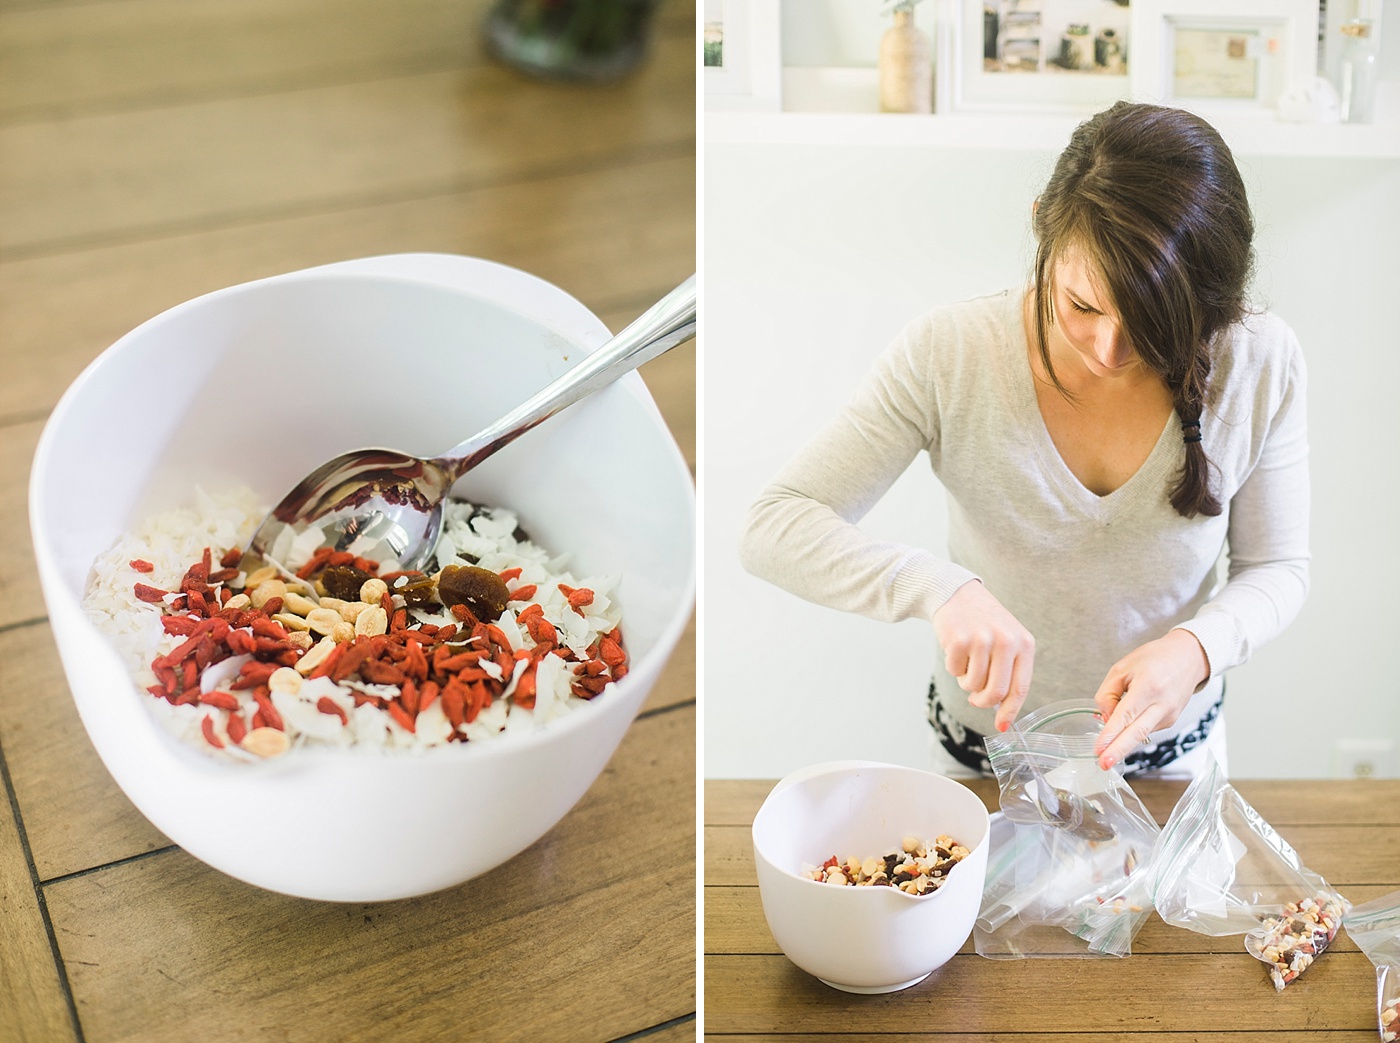 Health Hack: Be Healthy and Save Time prepping and planning meals with PrepDish